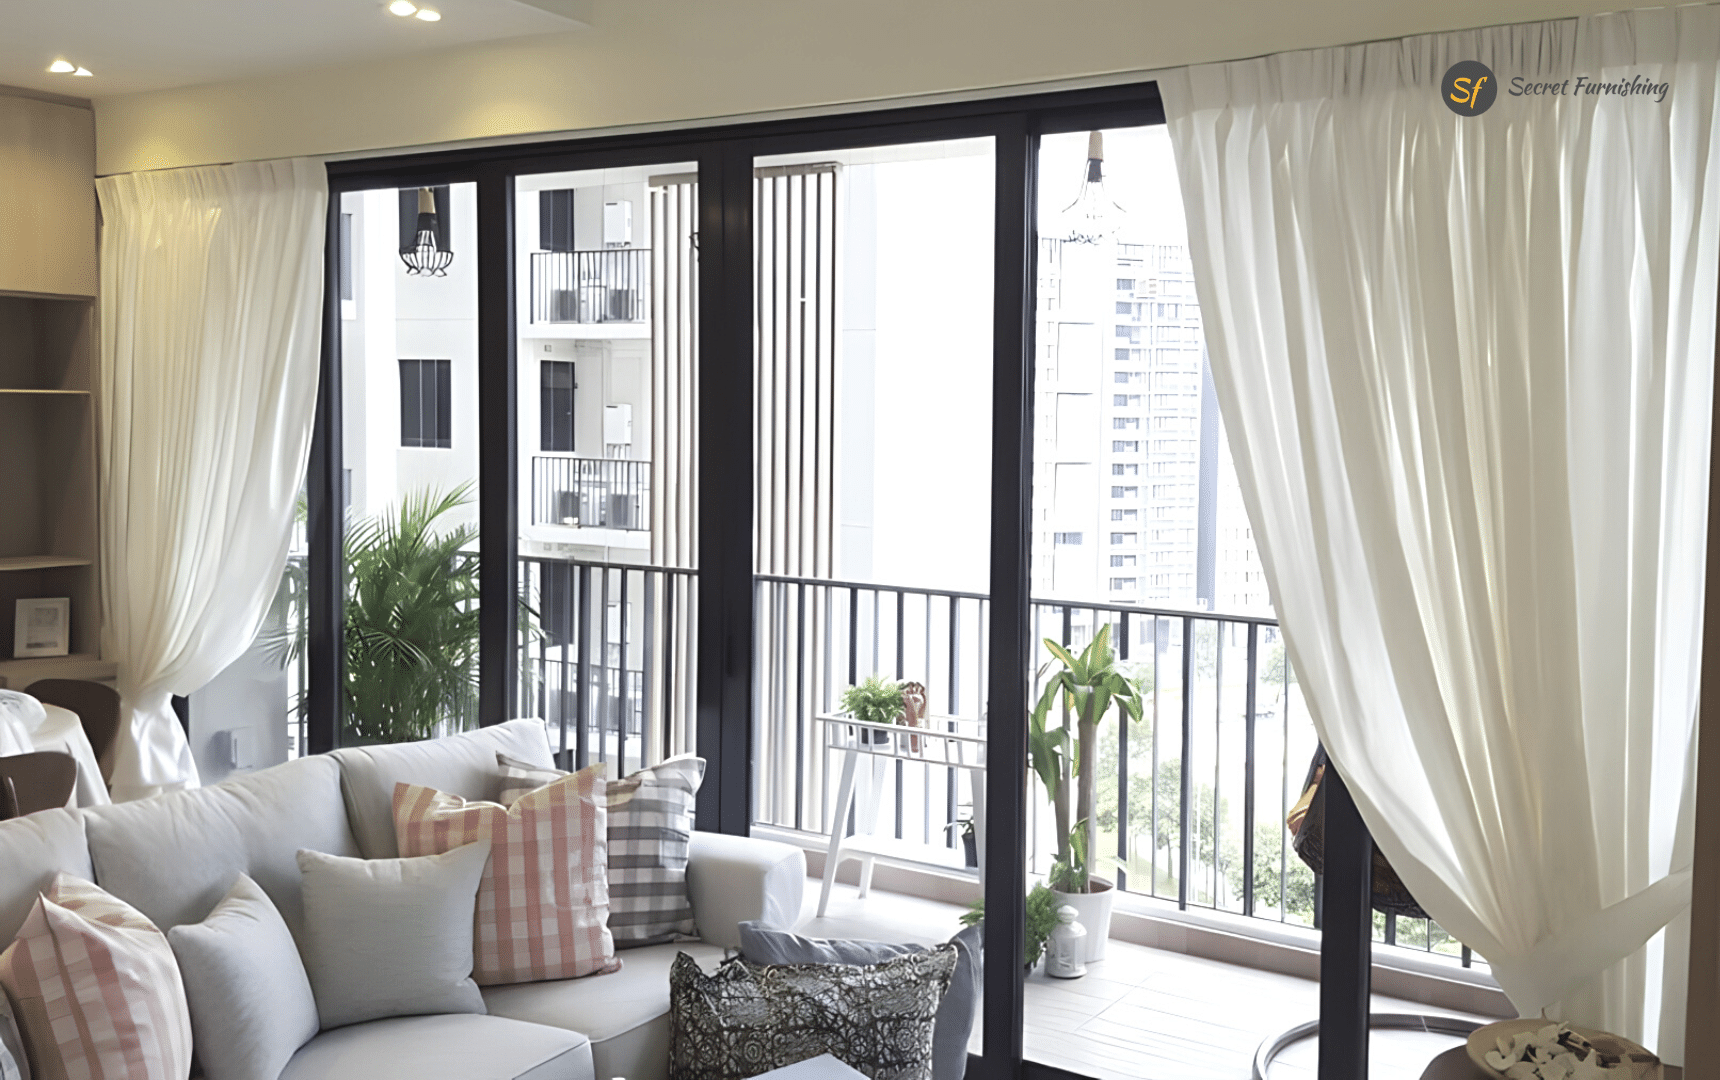 Curtains and Blinds Singapore: The Perfect Window Coverings